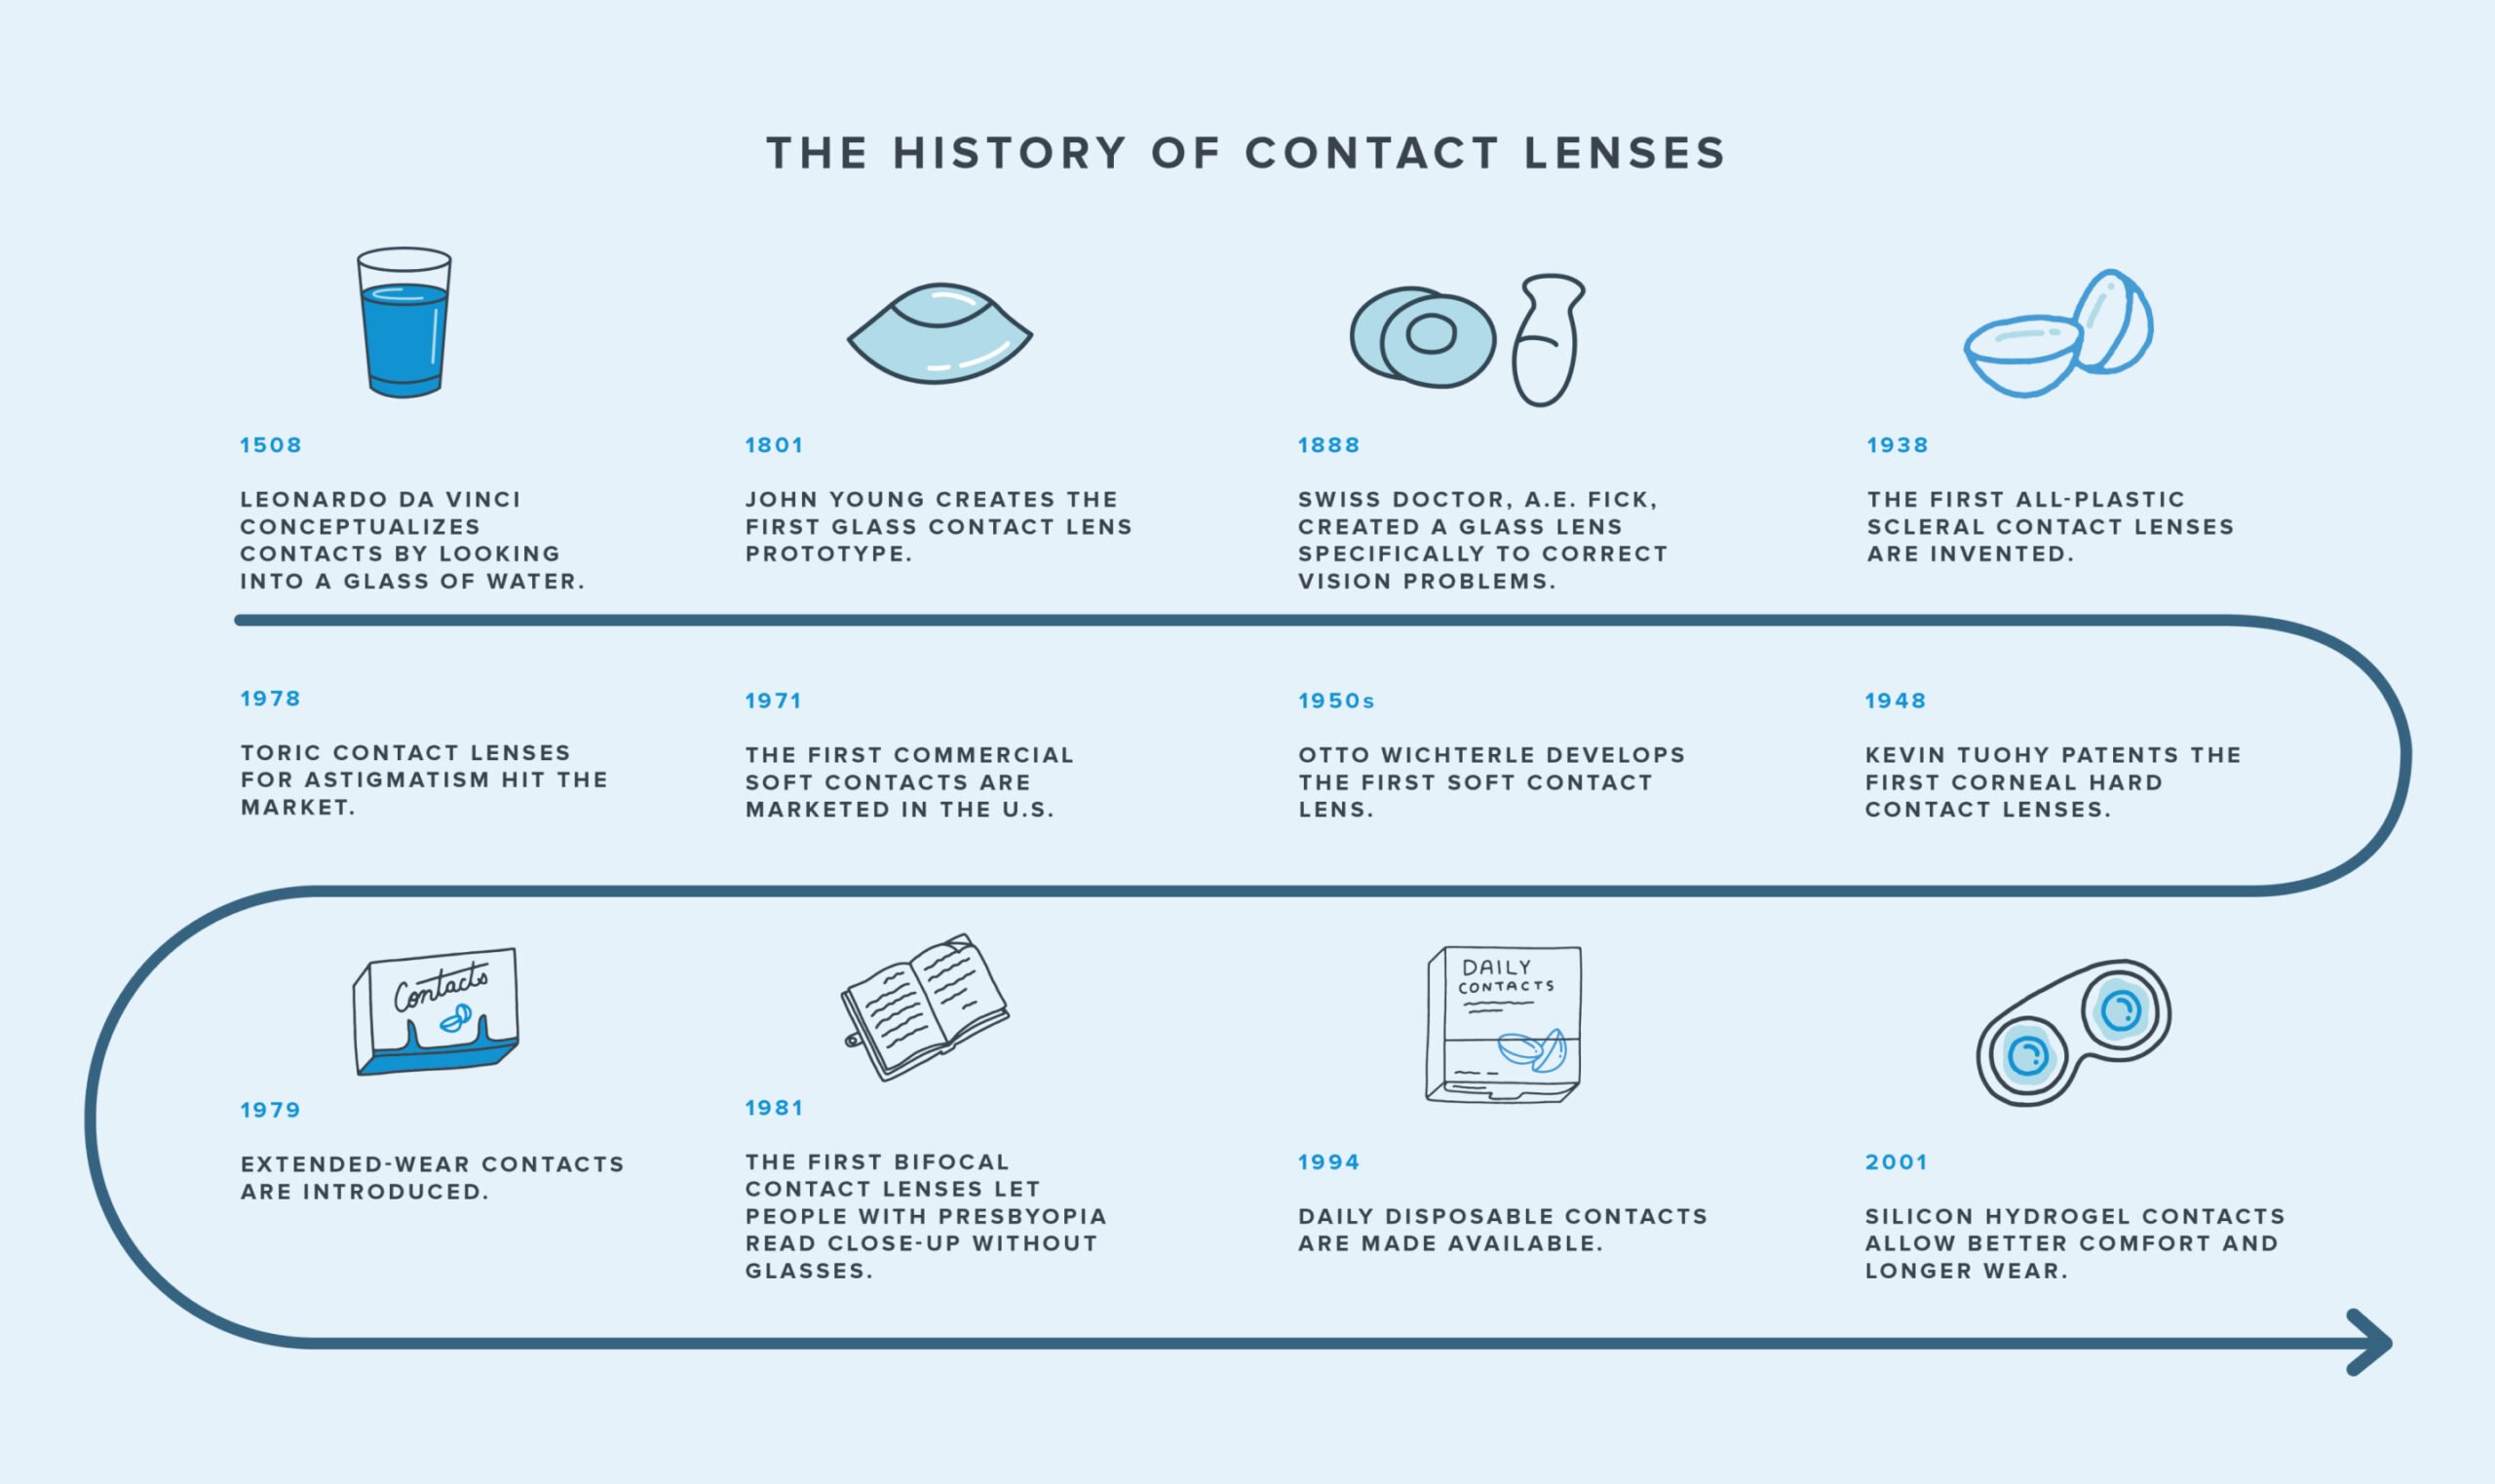 Illustrated timeline showing the history of contact lenses